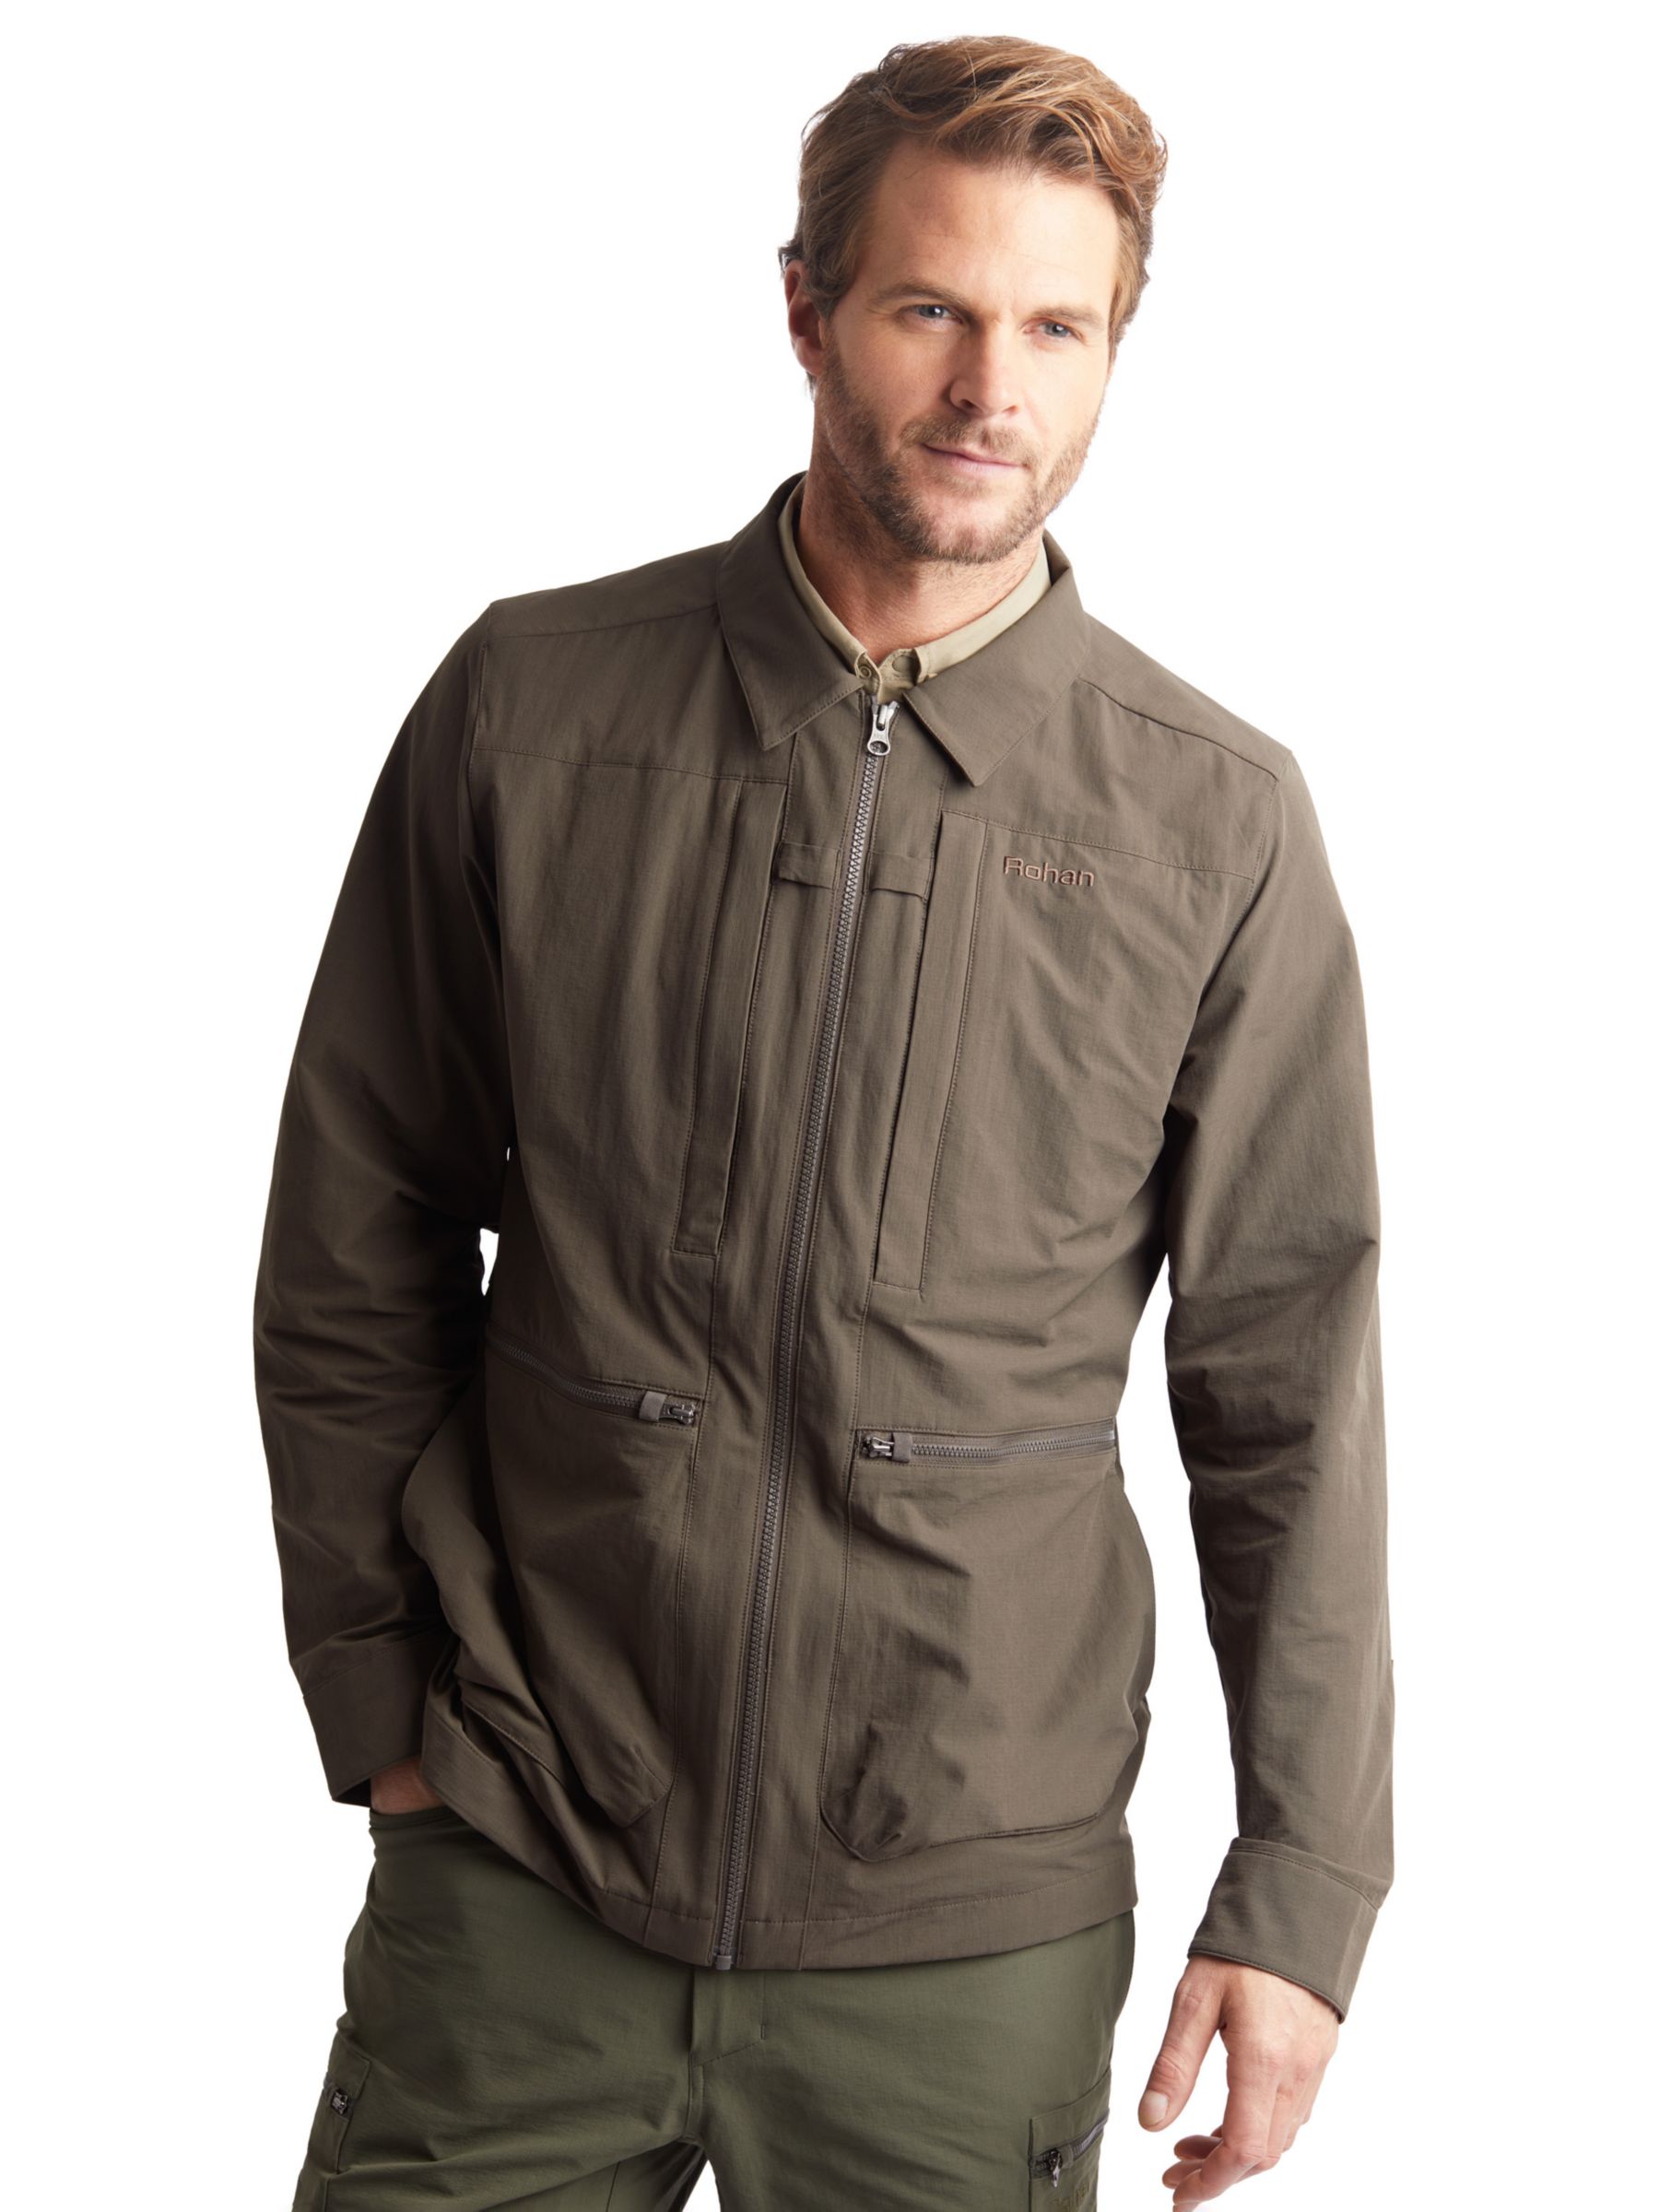 Rohan Frontier Anti-Insect Expedition Jacket, Dark Olive Brown, XS